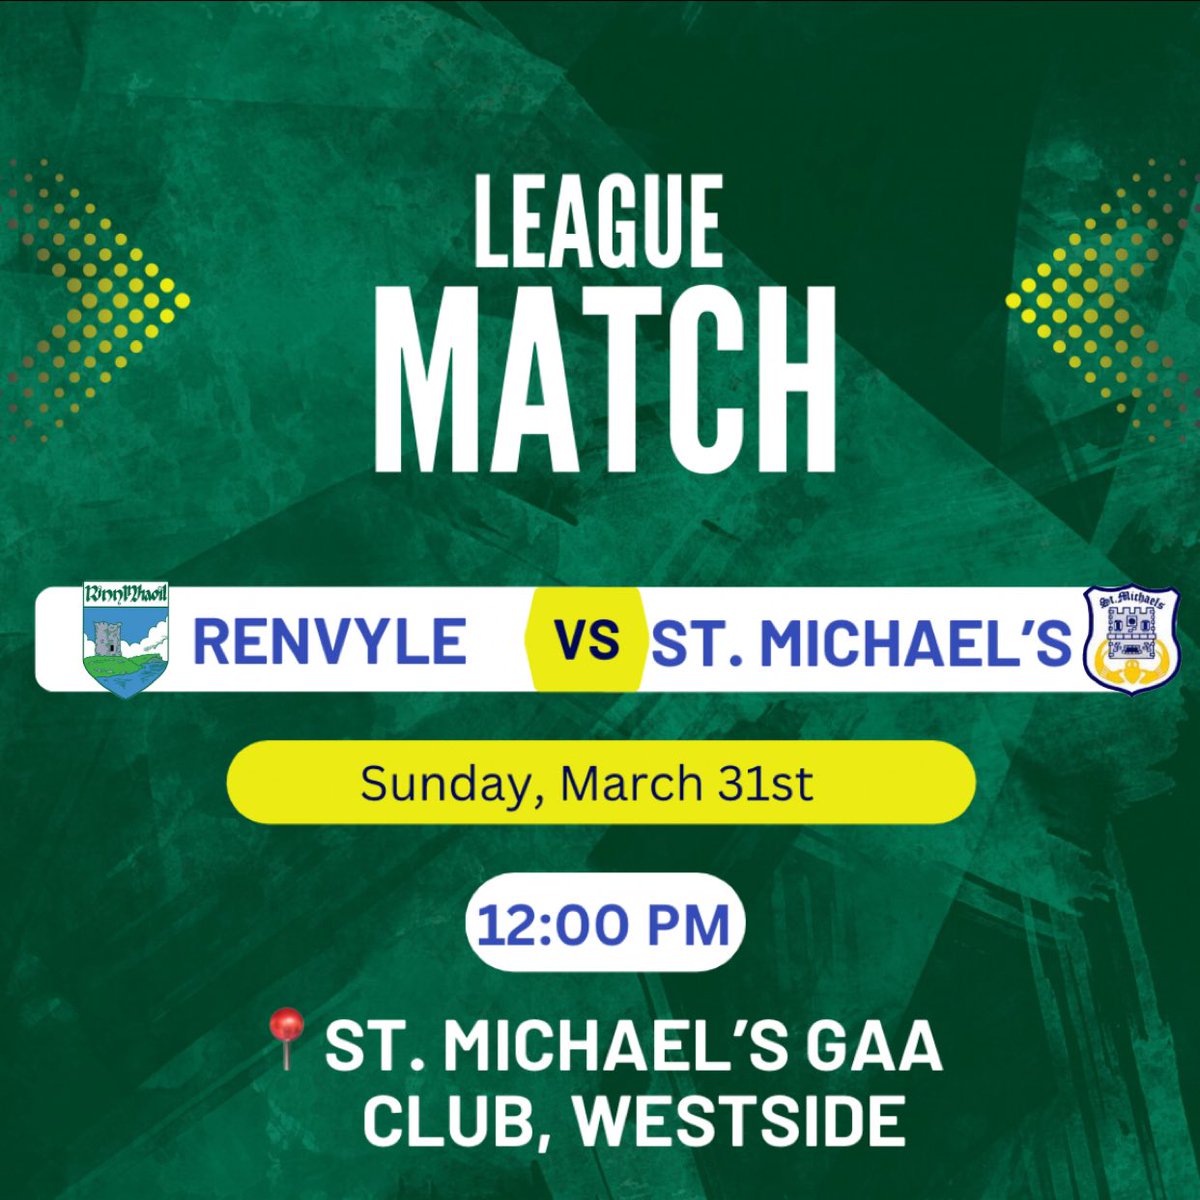 This Easter Sunday, our adult team are playing the second round of the league, after the postponement of the first round. This match is taking place in Westside at 12pm. We wish both team and management the best of luck 💚💛